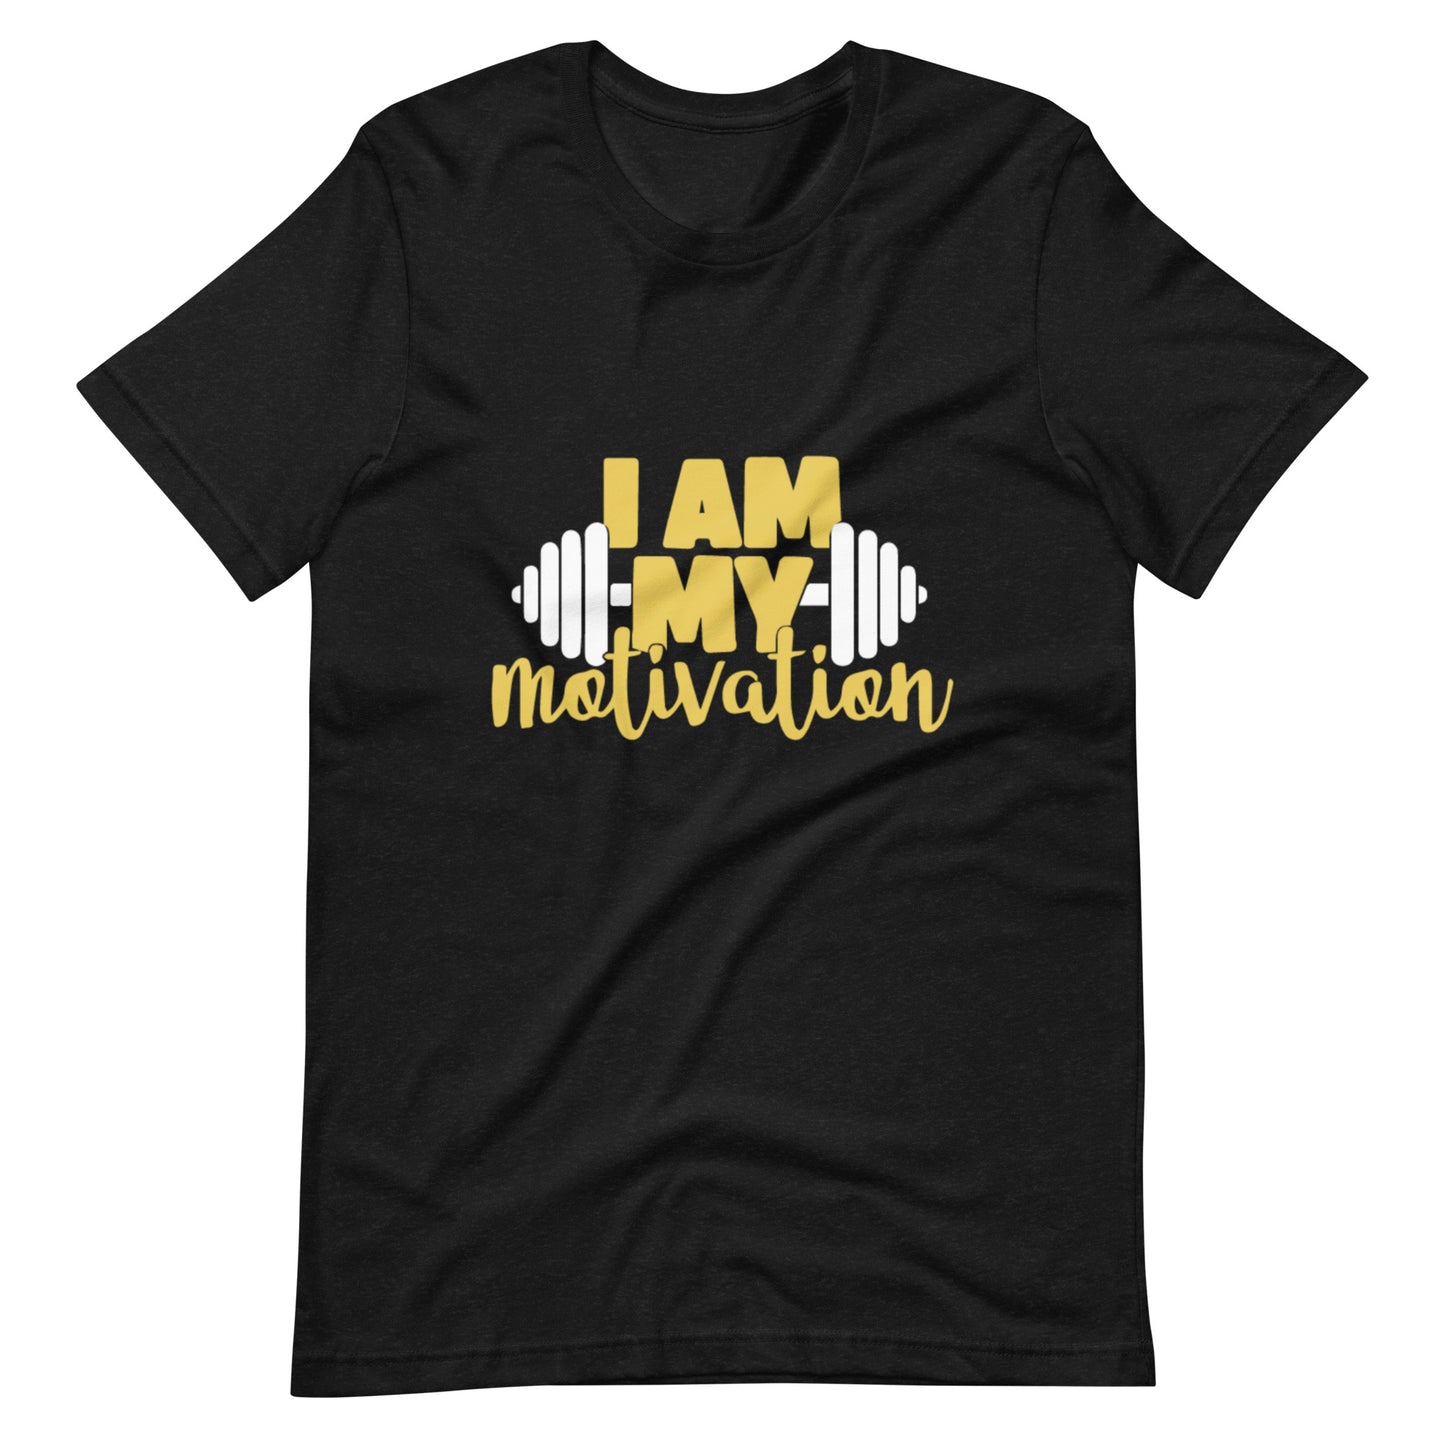 I am my motivation Tee The Workout Inspiration